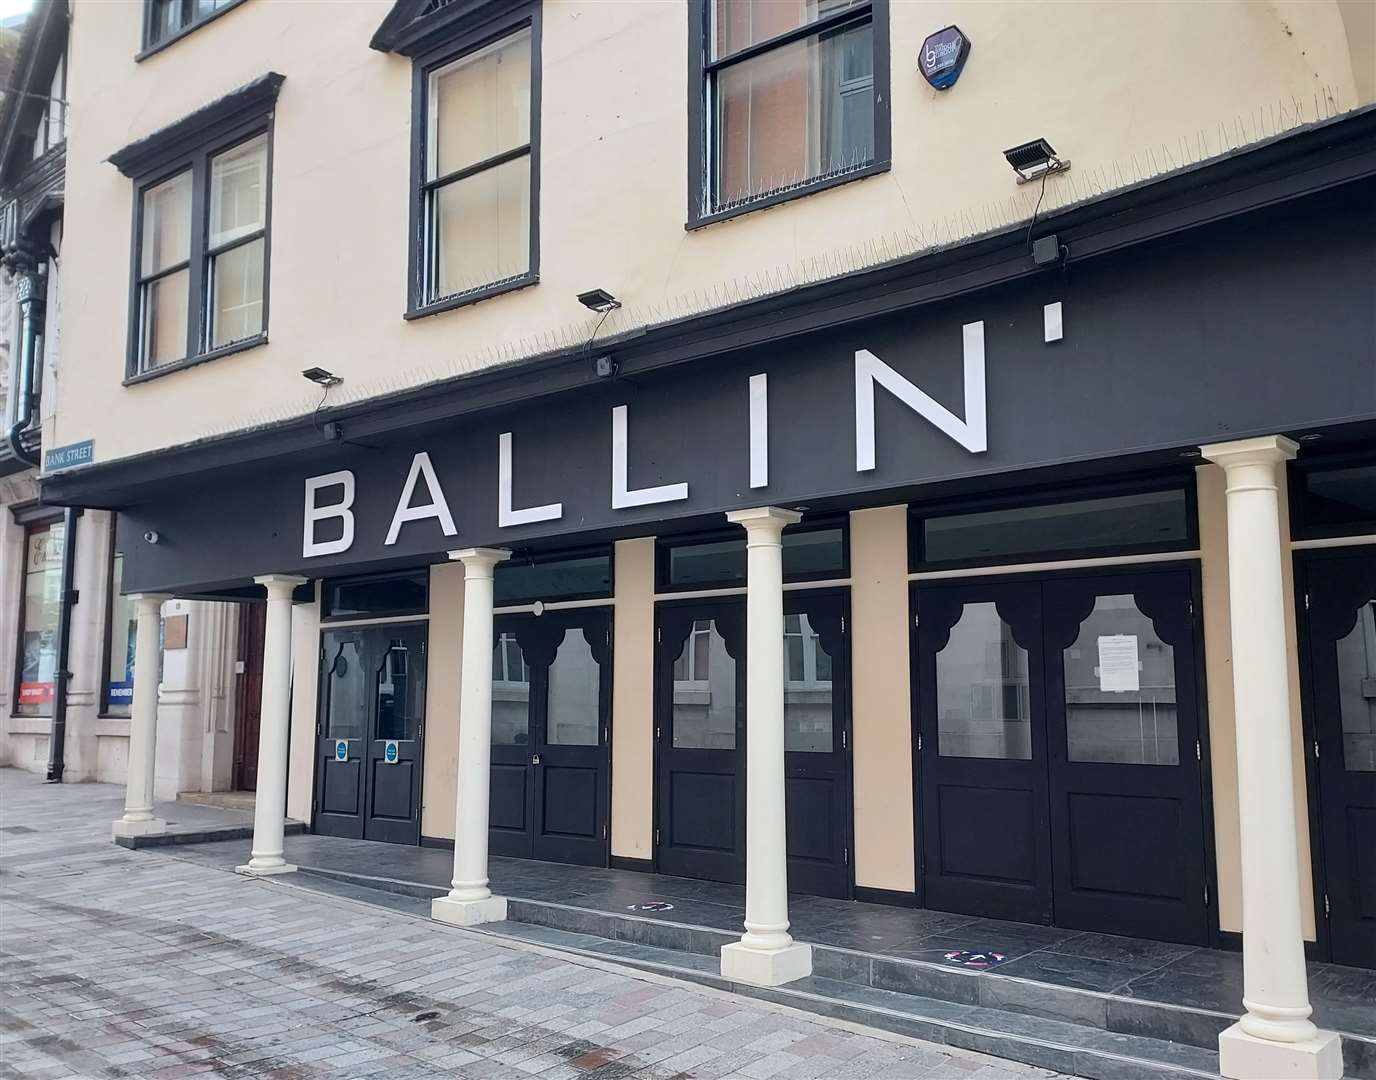 Ballin' Maidstone is a new sports bar which has opened in the County Town